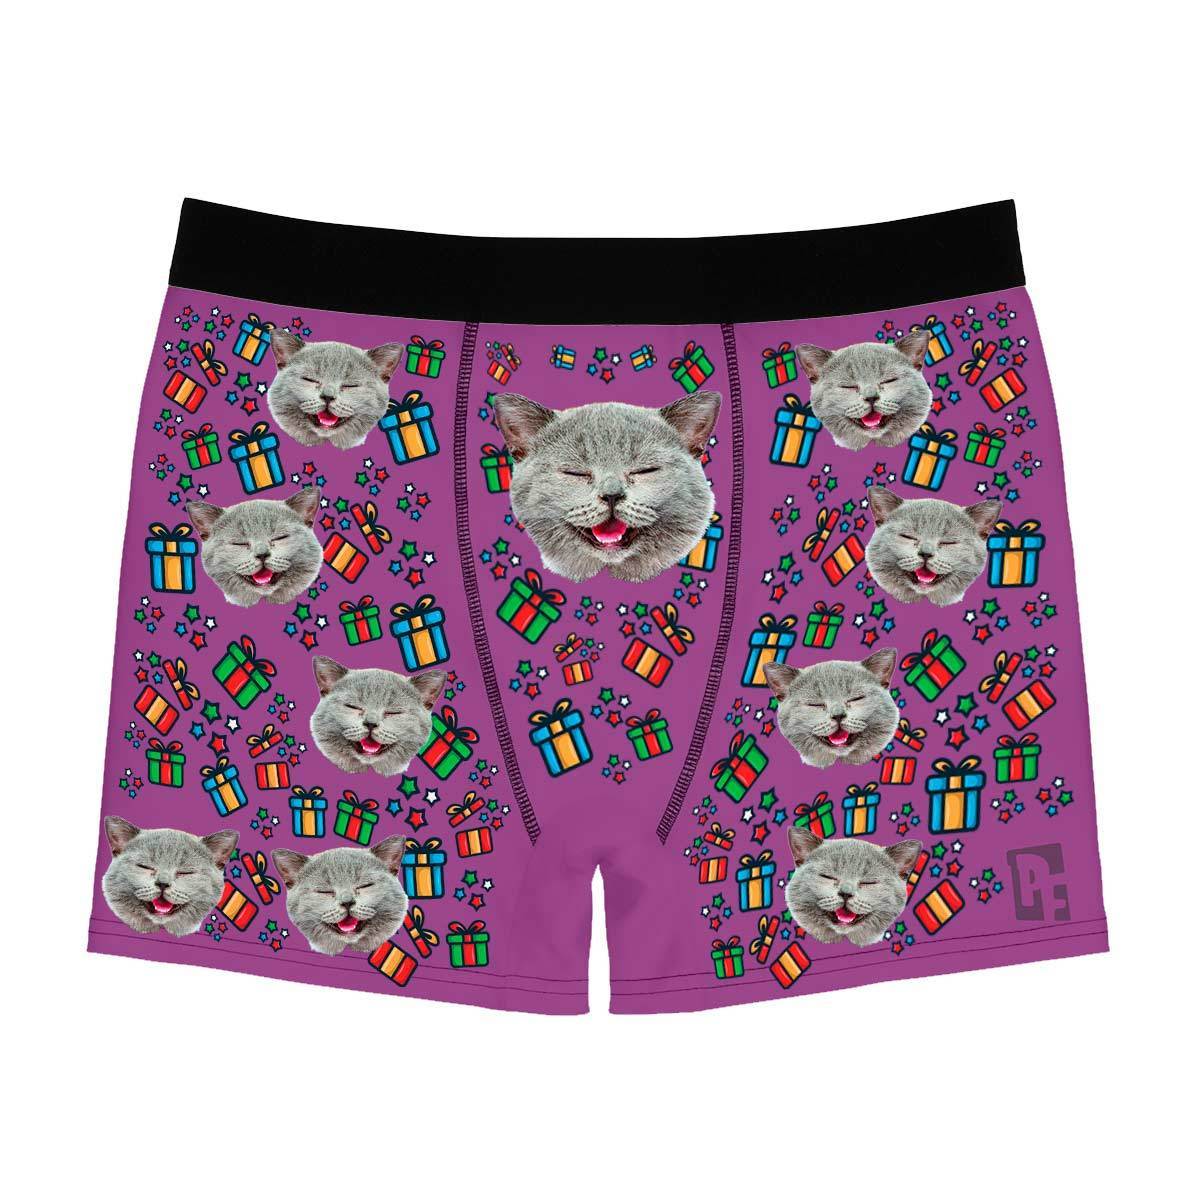 Purple Gift Box men's boxer briefs personalized with photo printed on them